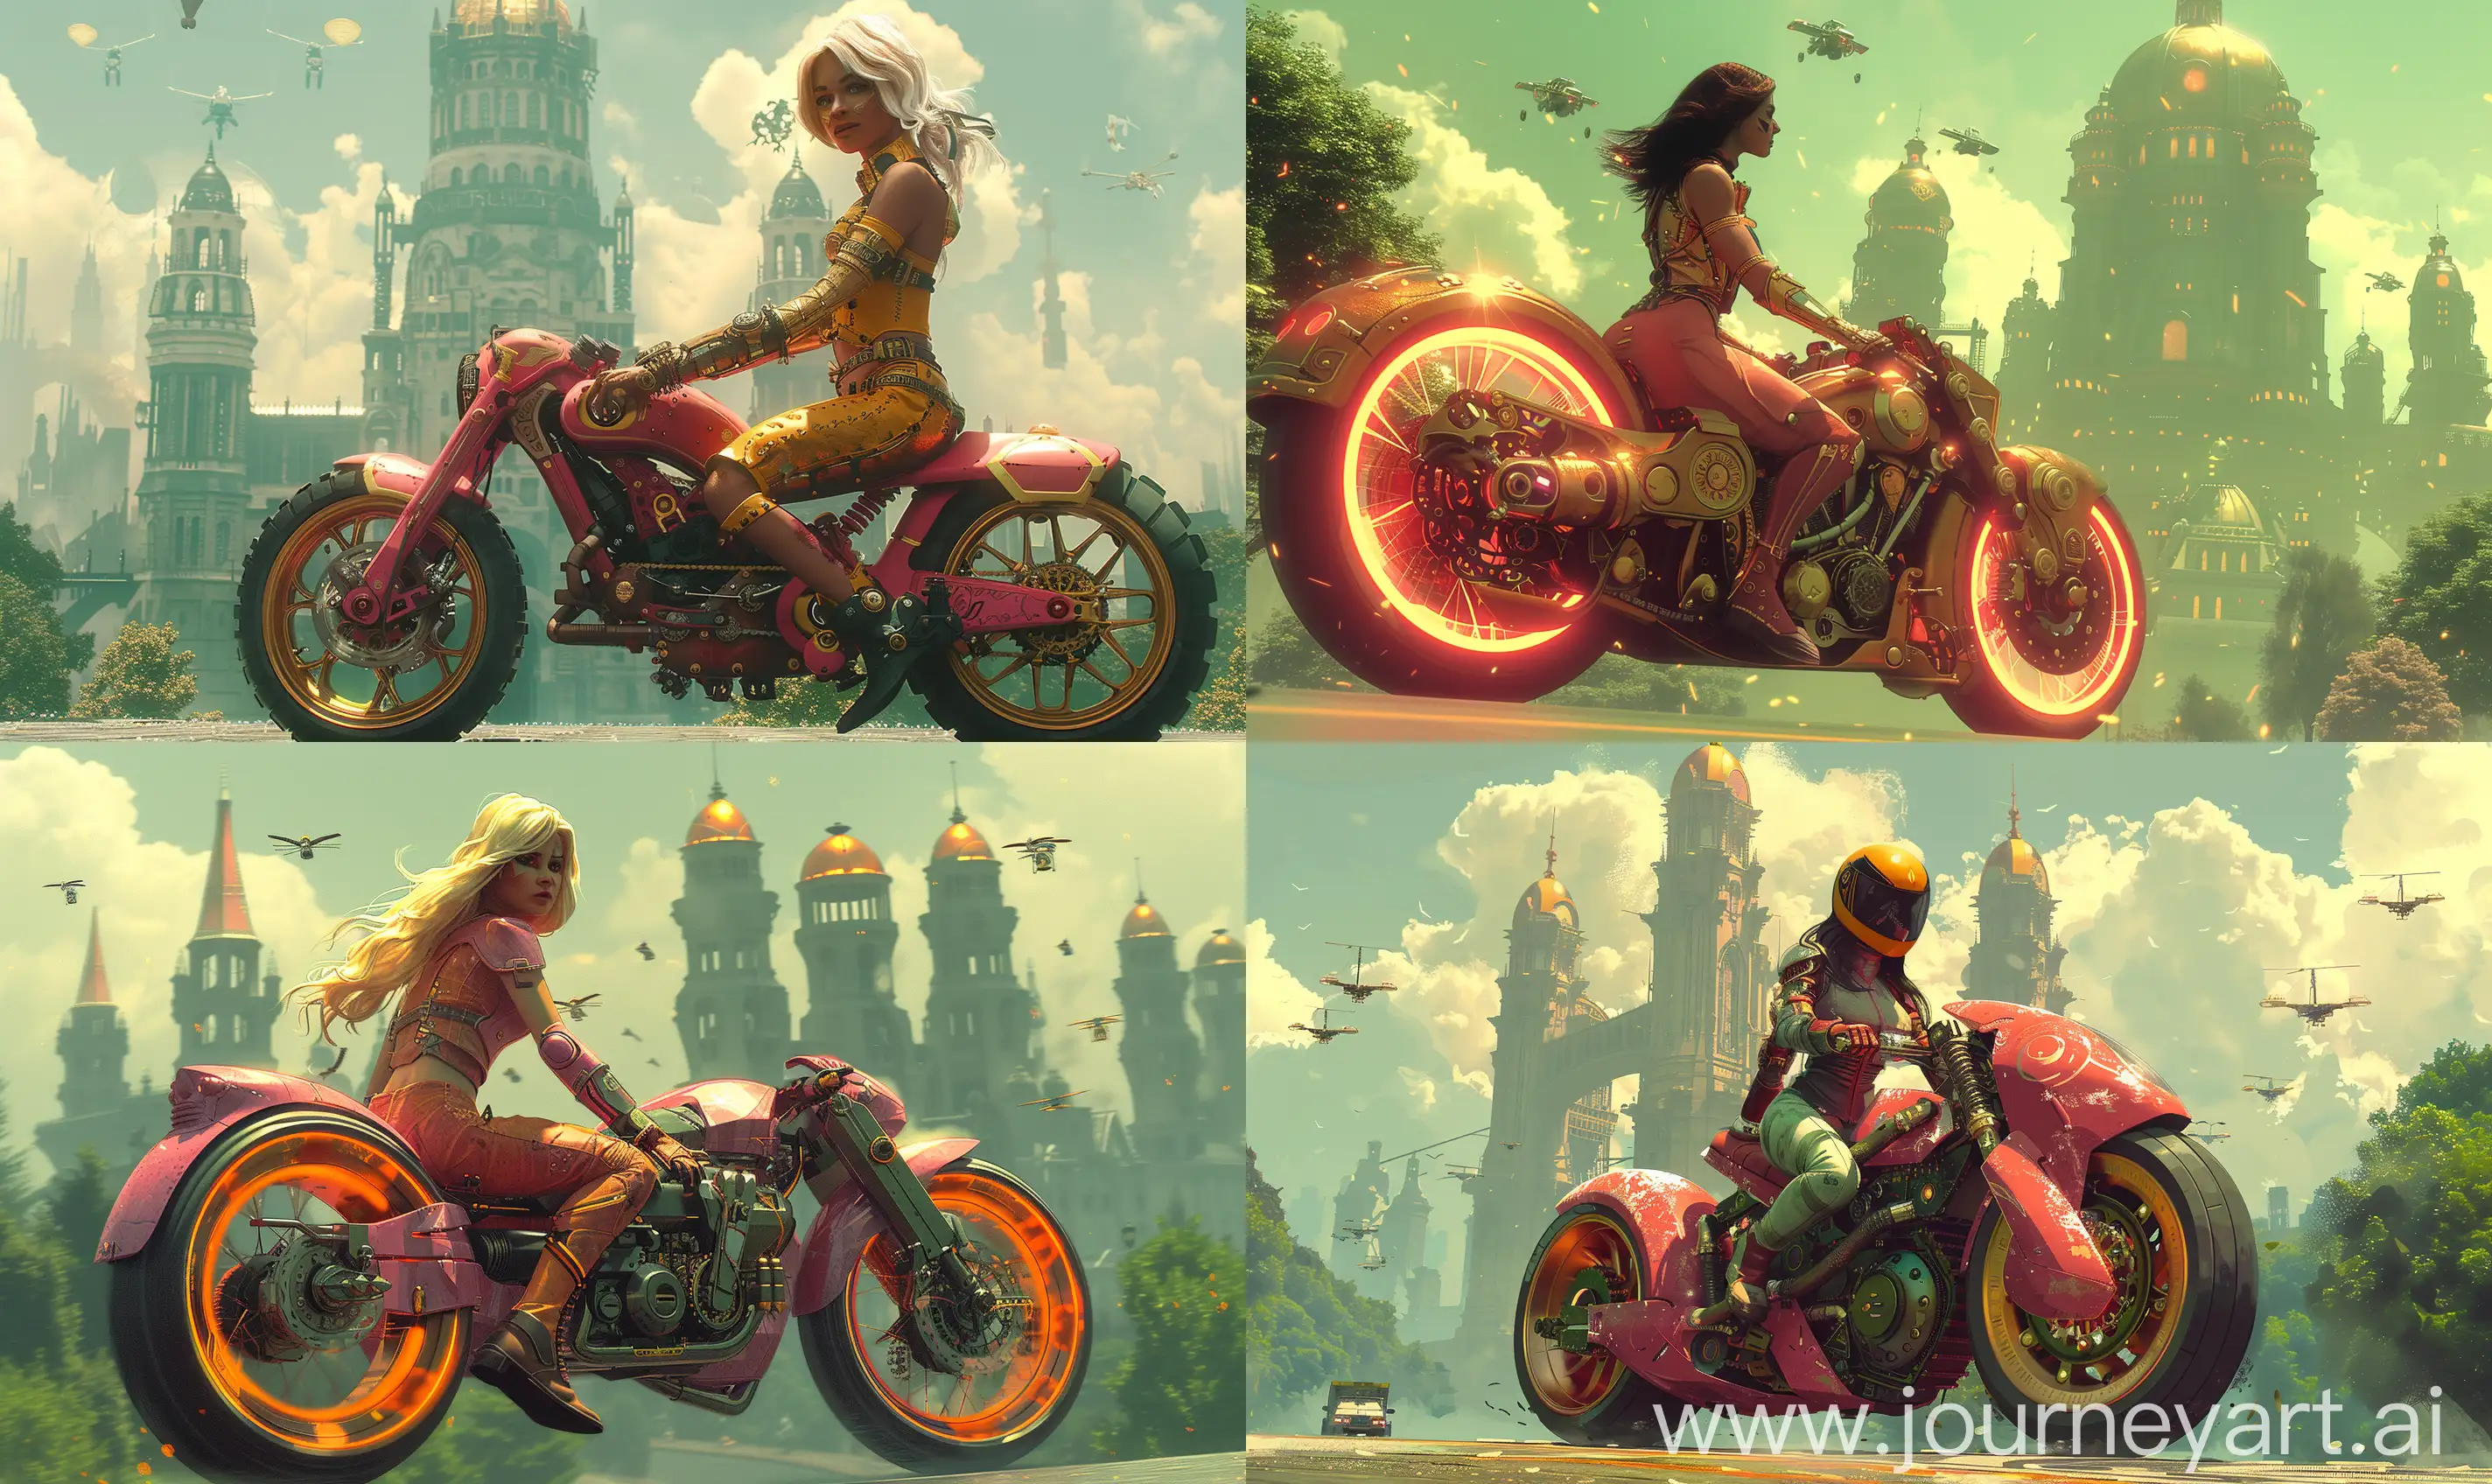 Futuristic-Steampunk-Amazon-Warrior-Riding-Motorcycle-in-VictorianInspired-Cityscape